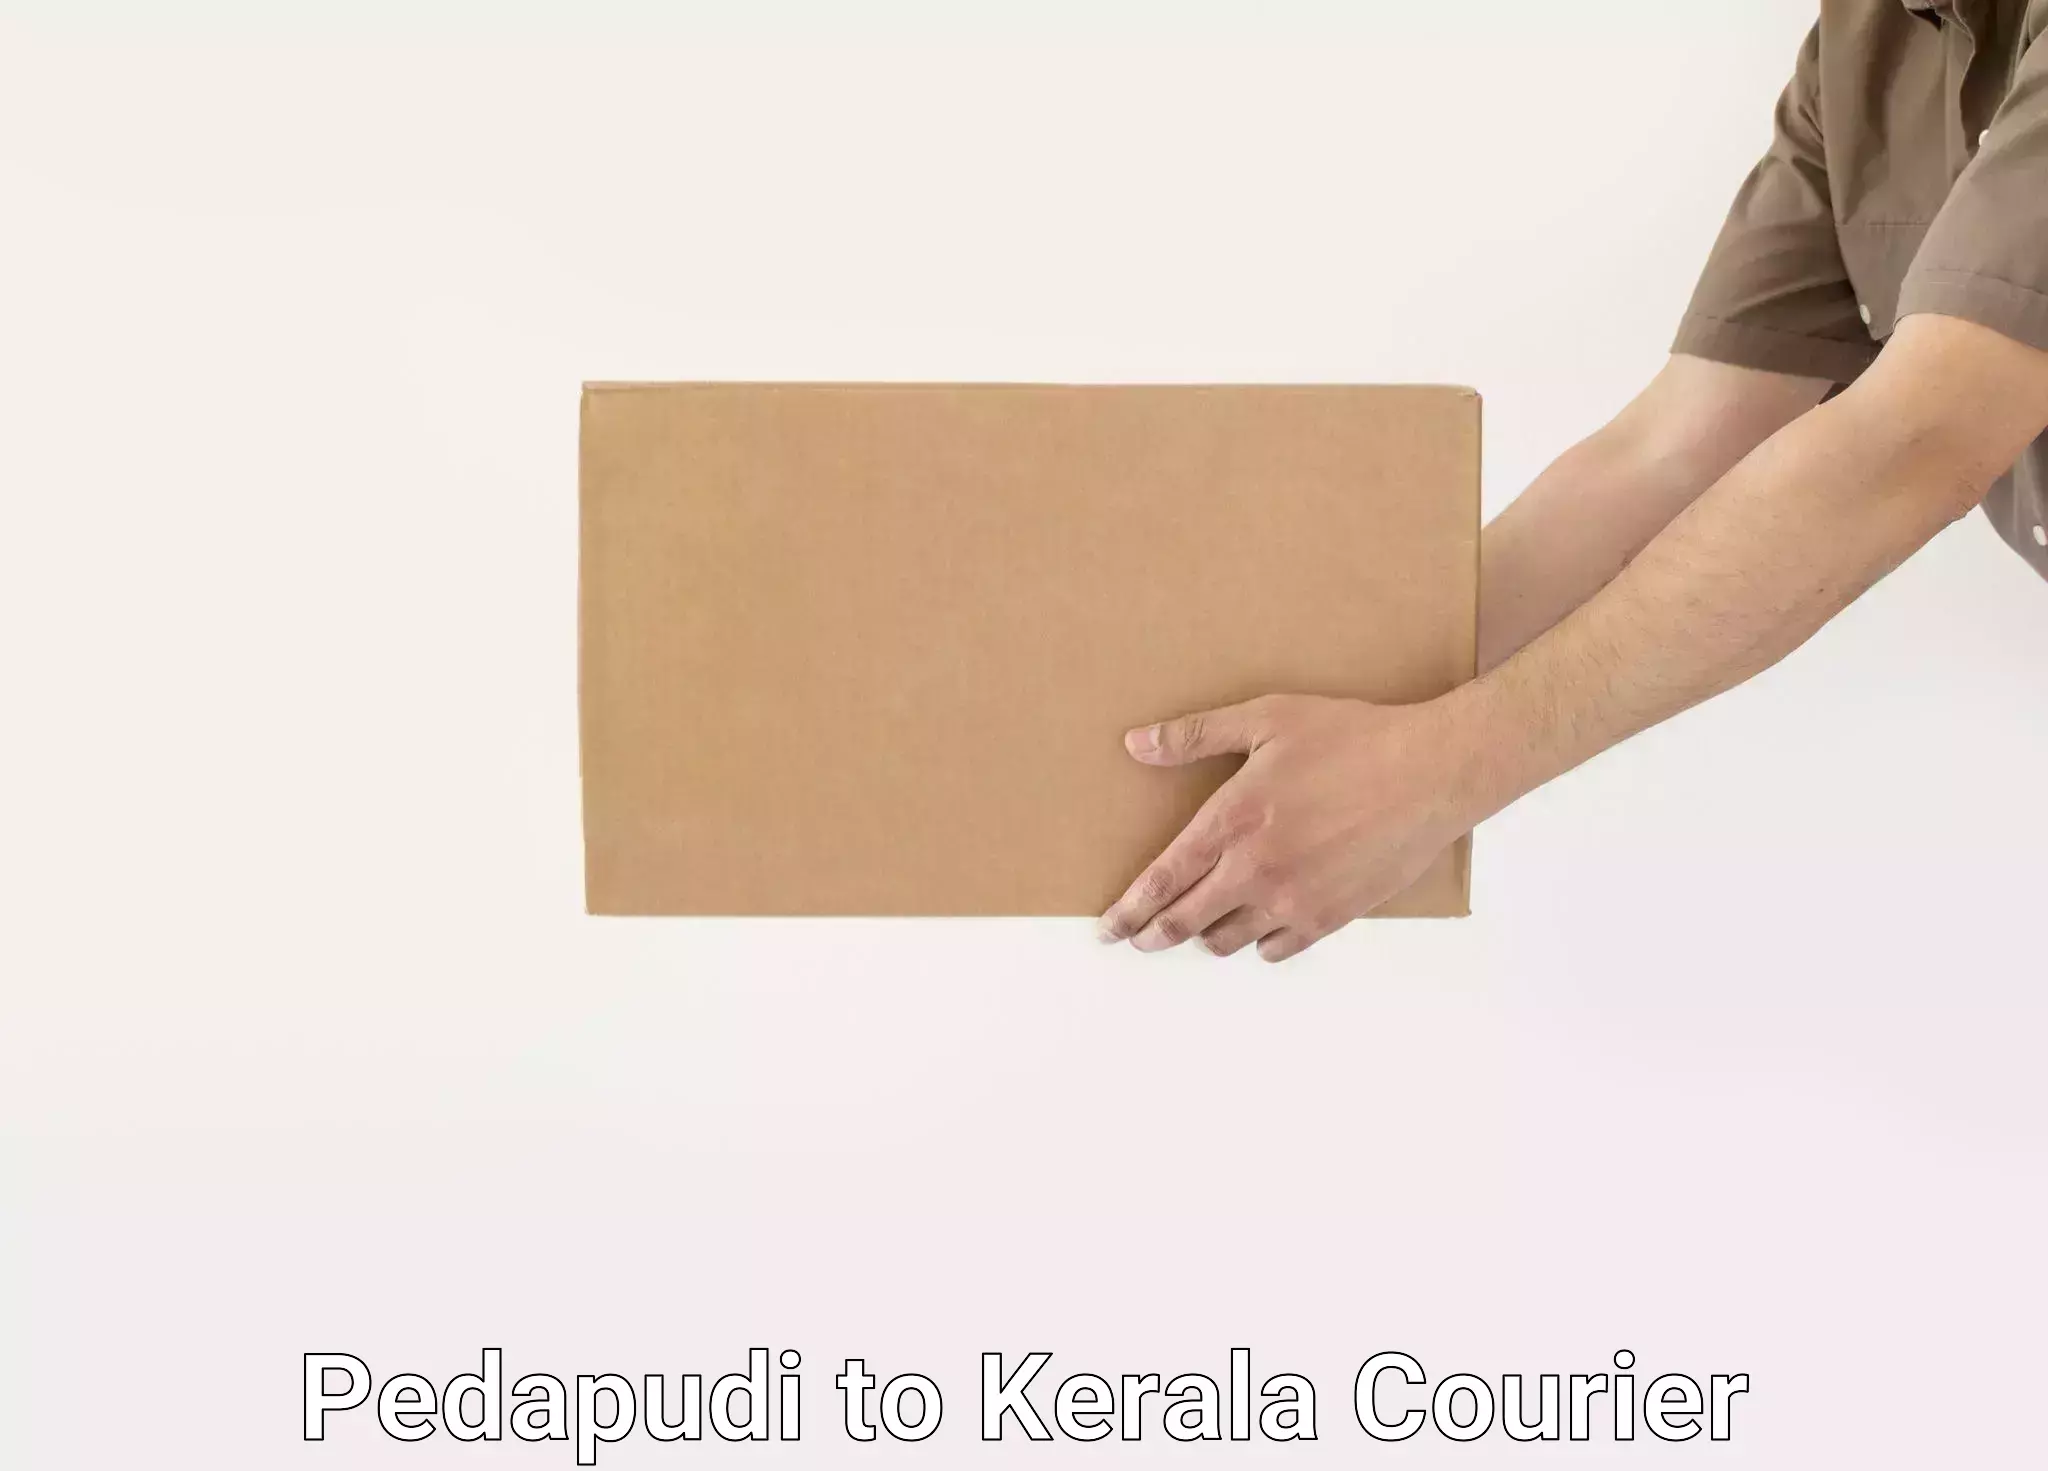 Specialized moving company Pedapudi to Kerala